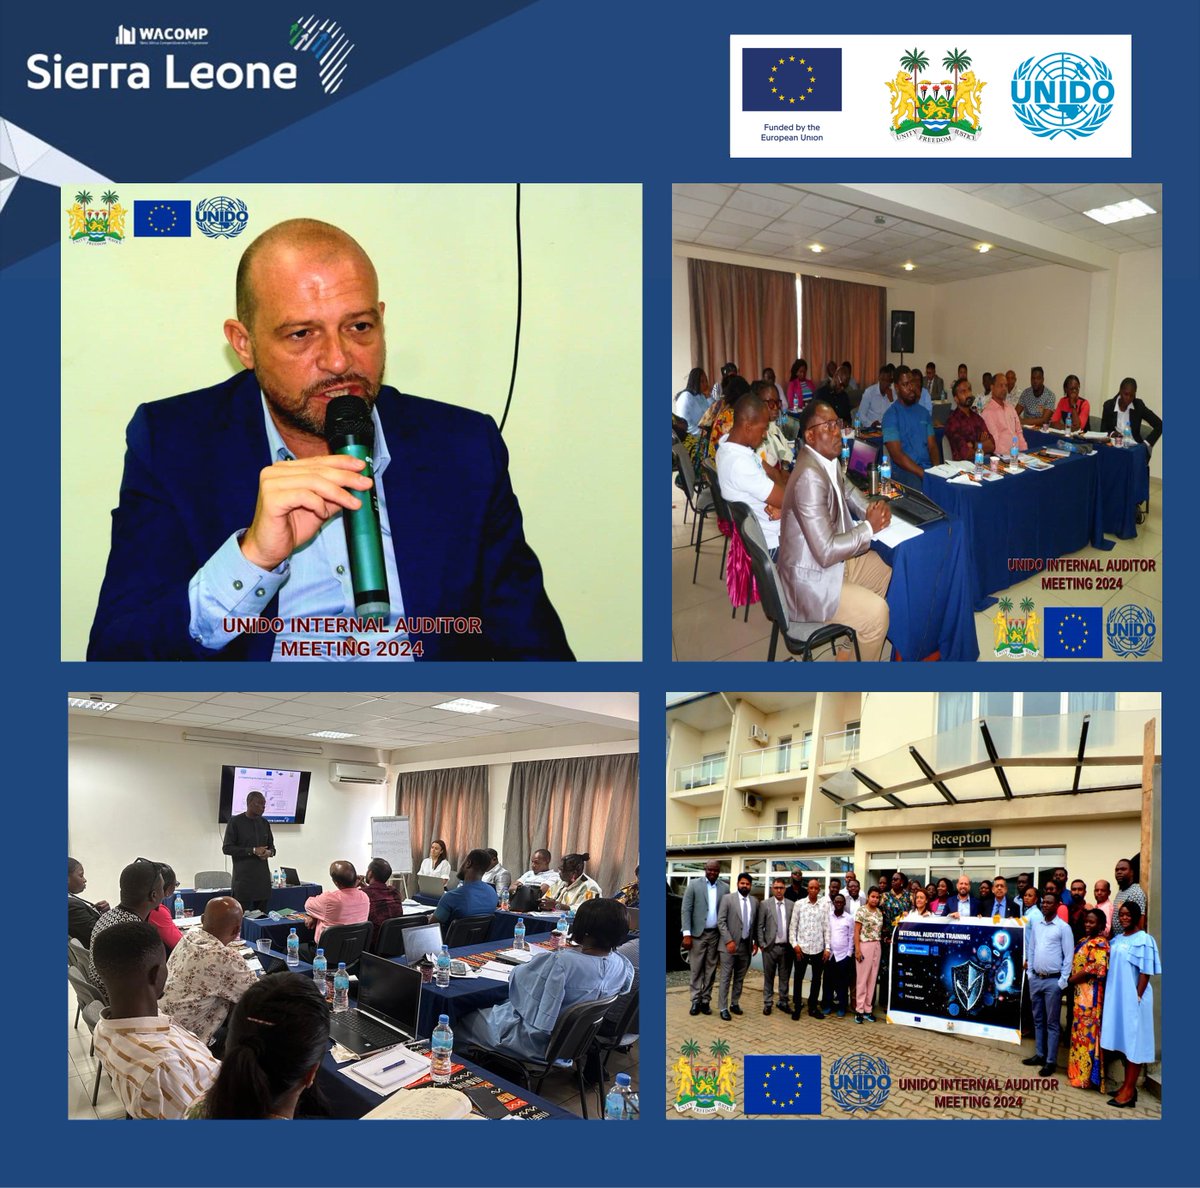 May 8th @EUinSierraLeone funded #WACOMP_SL @UNIDO excited to start a 3-day IA for FoodSafety Trg Prg as per #ISO22000! Mario, Lead EUD, Highlights #FoodSafety& #HACCP's vital role in EU export,Plus, insights from Emmanuel, Chief MTI, on the criticality of IA for #AfCFTA regime.